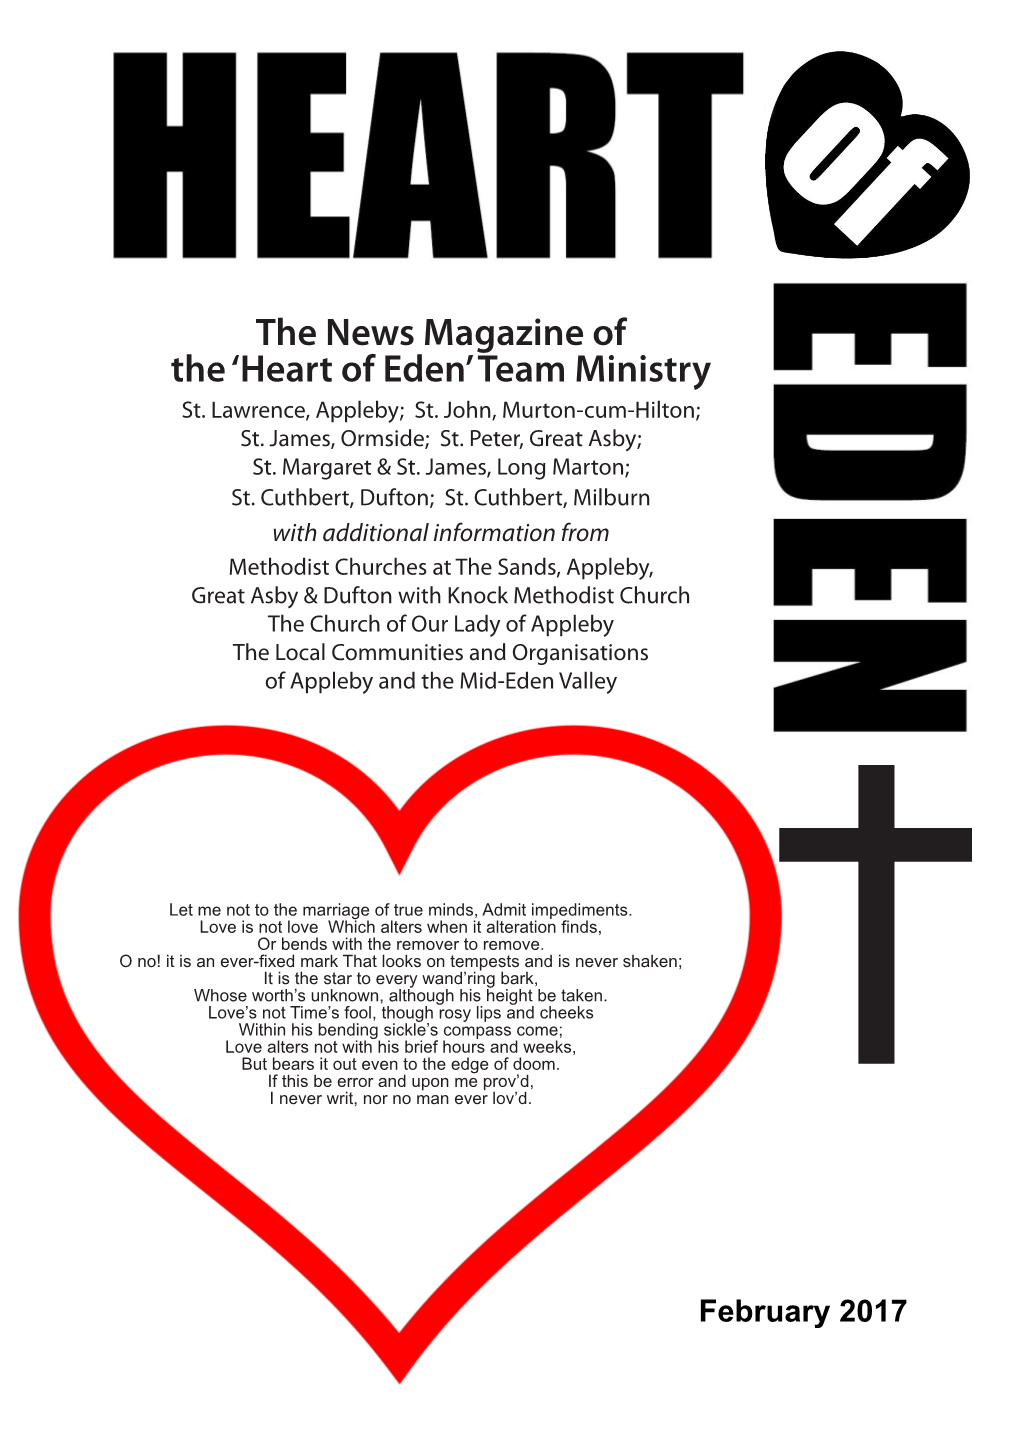 The News Magazine of the 'Heart of Eden' Team Ministry